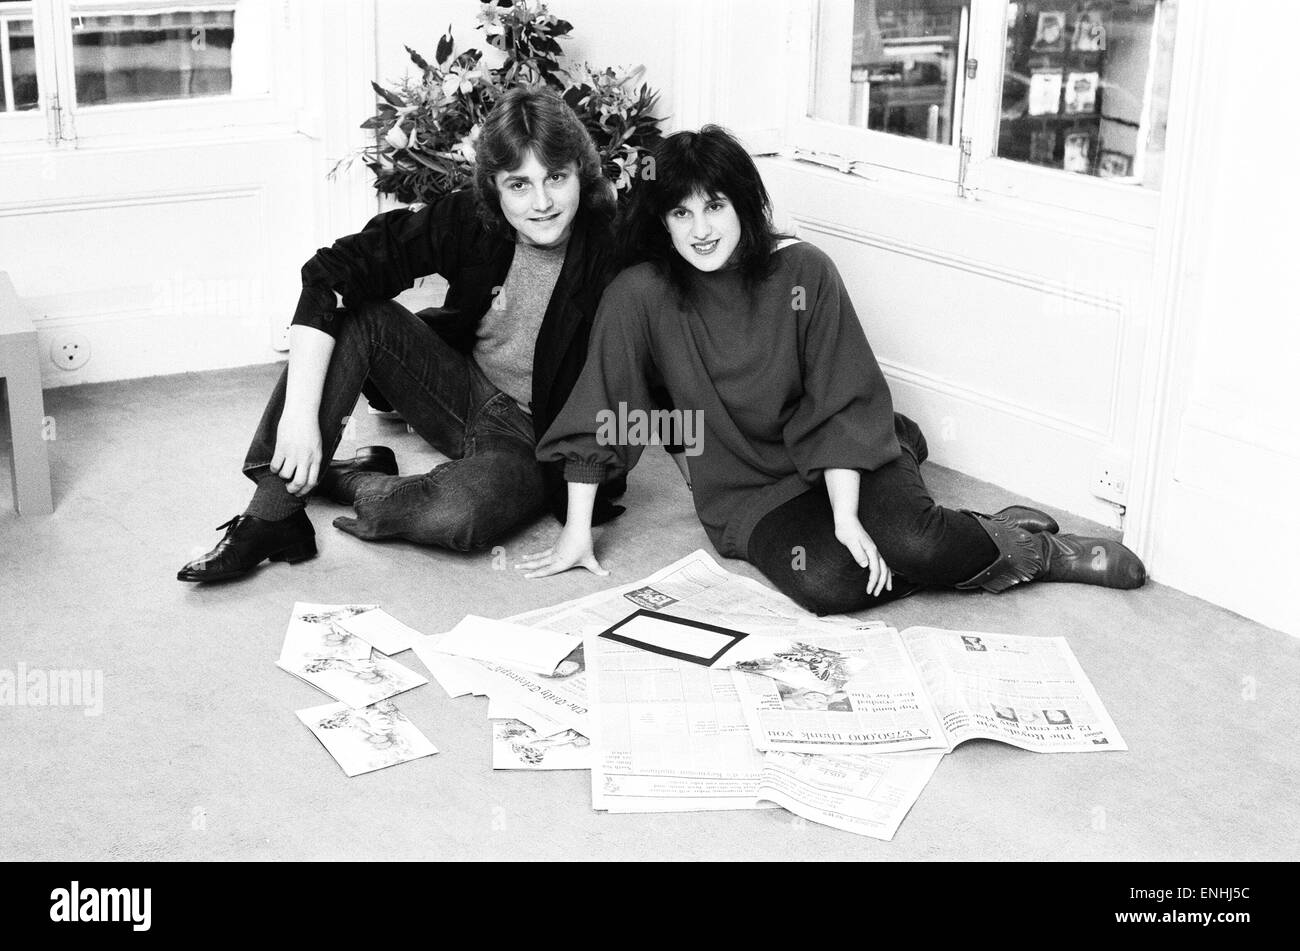 David & Elizabeth Emanuel, fashion designers, phootographed at their studio in Brooke Street, Mayfair, London, 11th March 1981. It was recently announced that they have been chosen to design the wedding dress of Lady Diana Spencer. Stock Photo